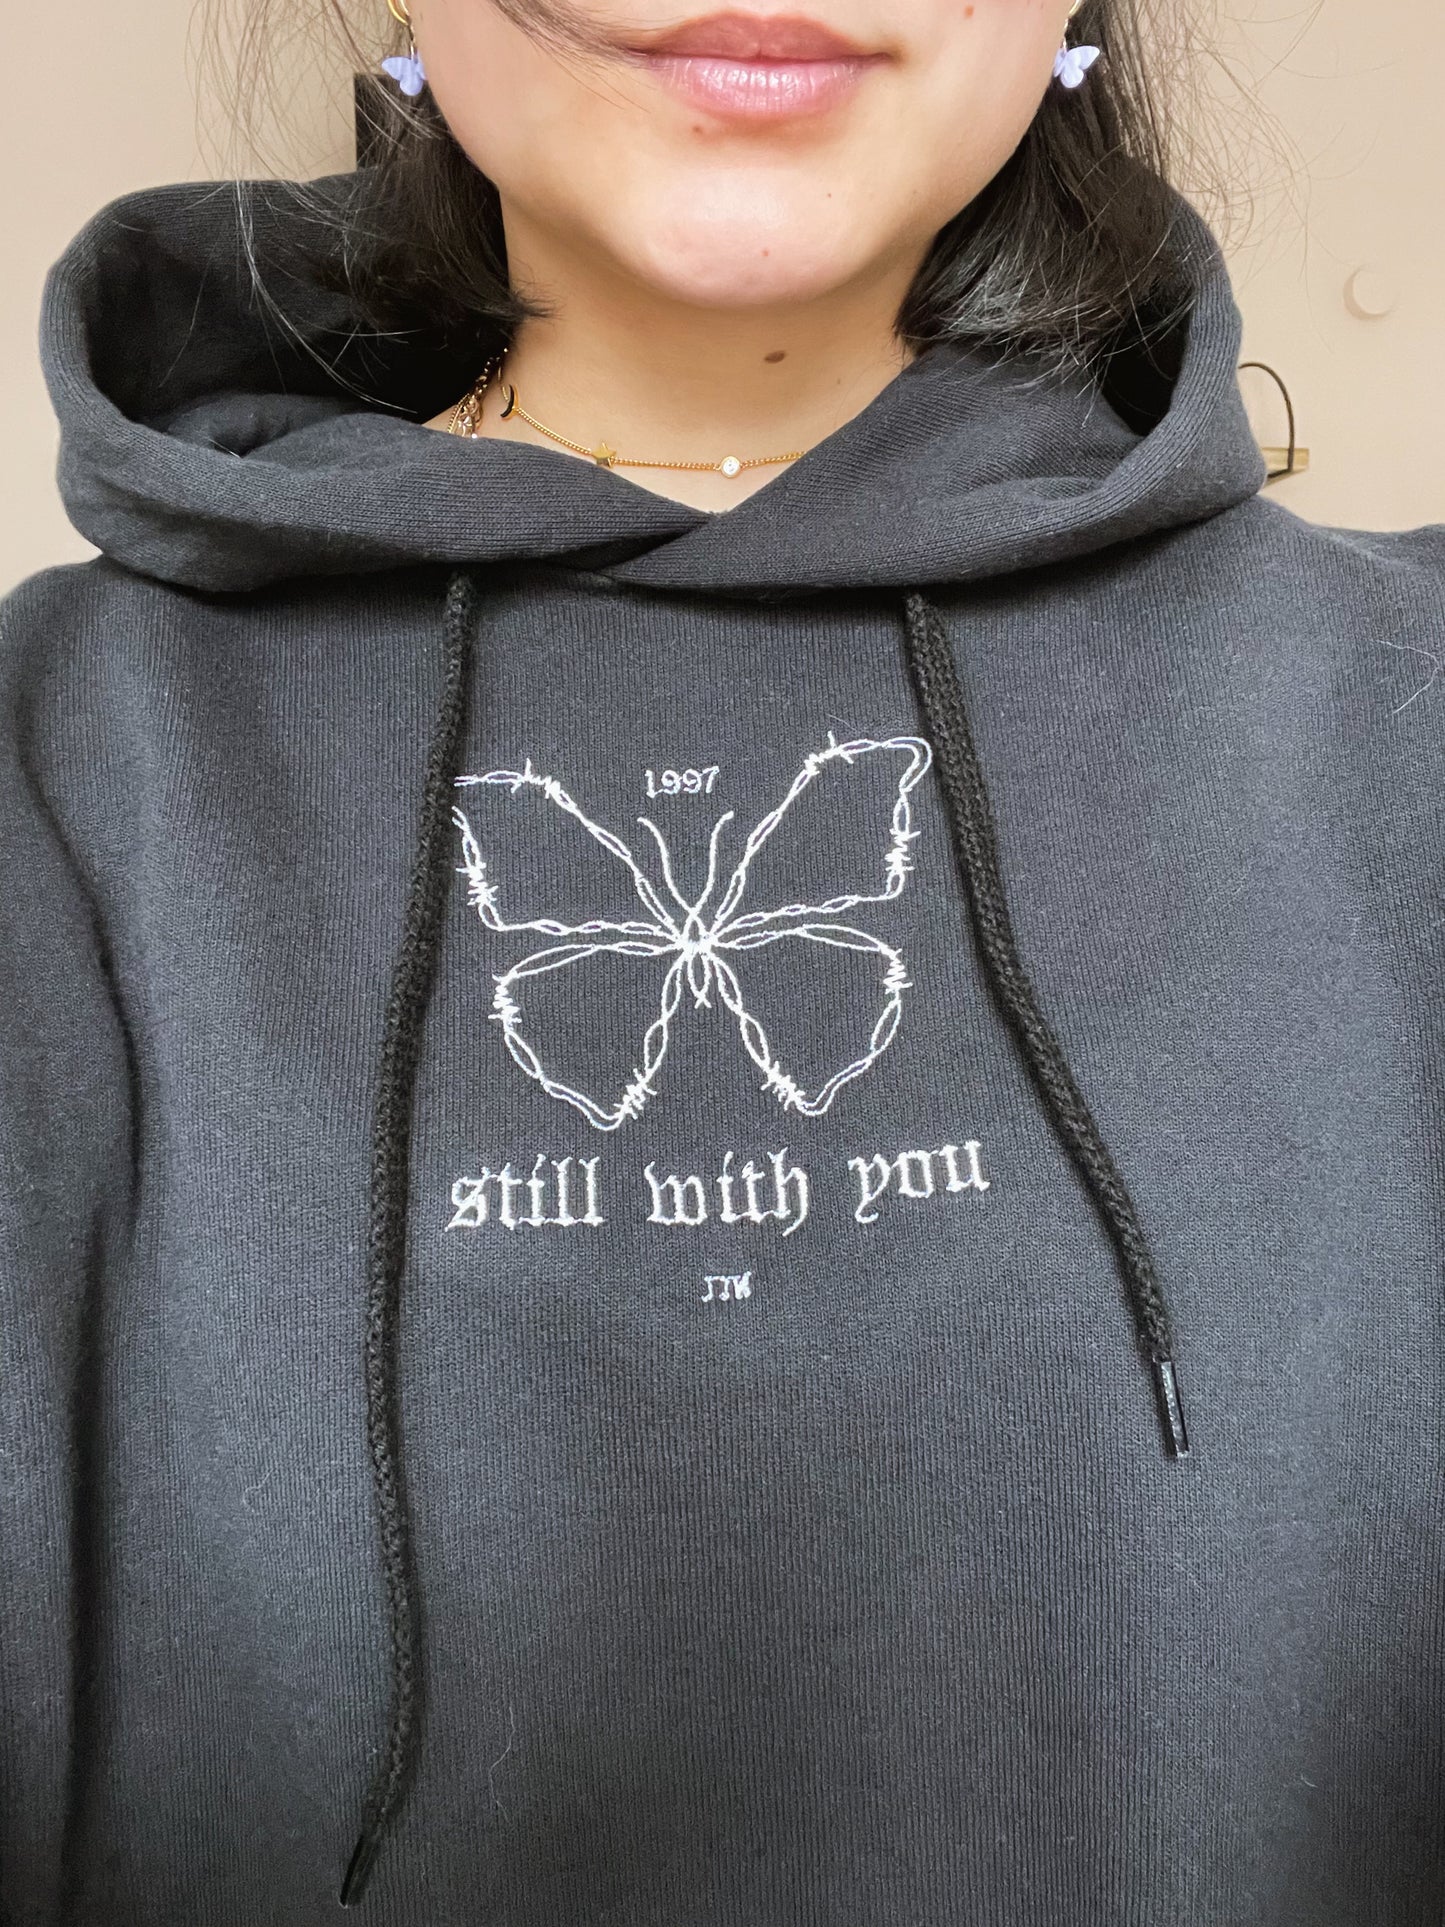 Still with you - Hoodie (PRE-ORDER)